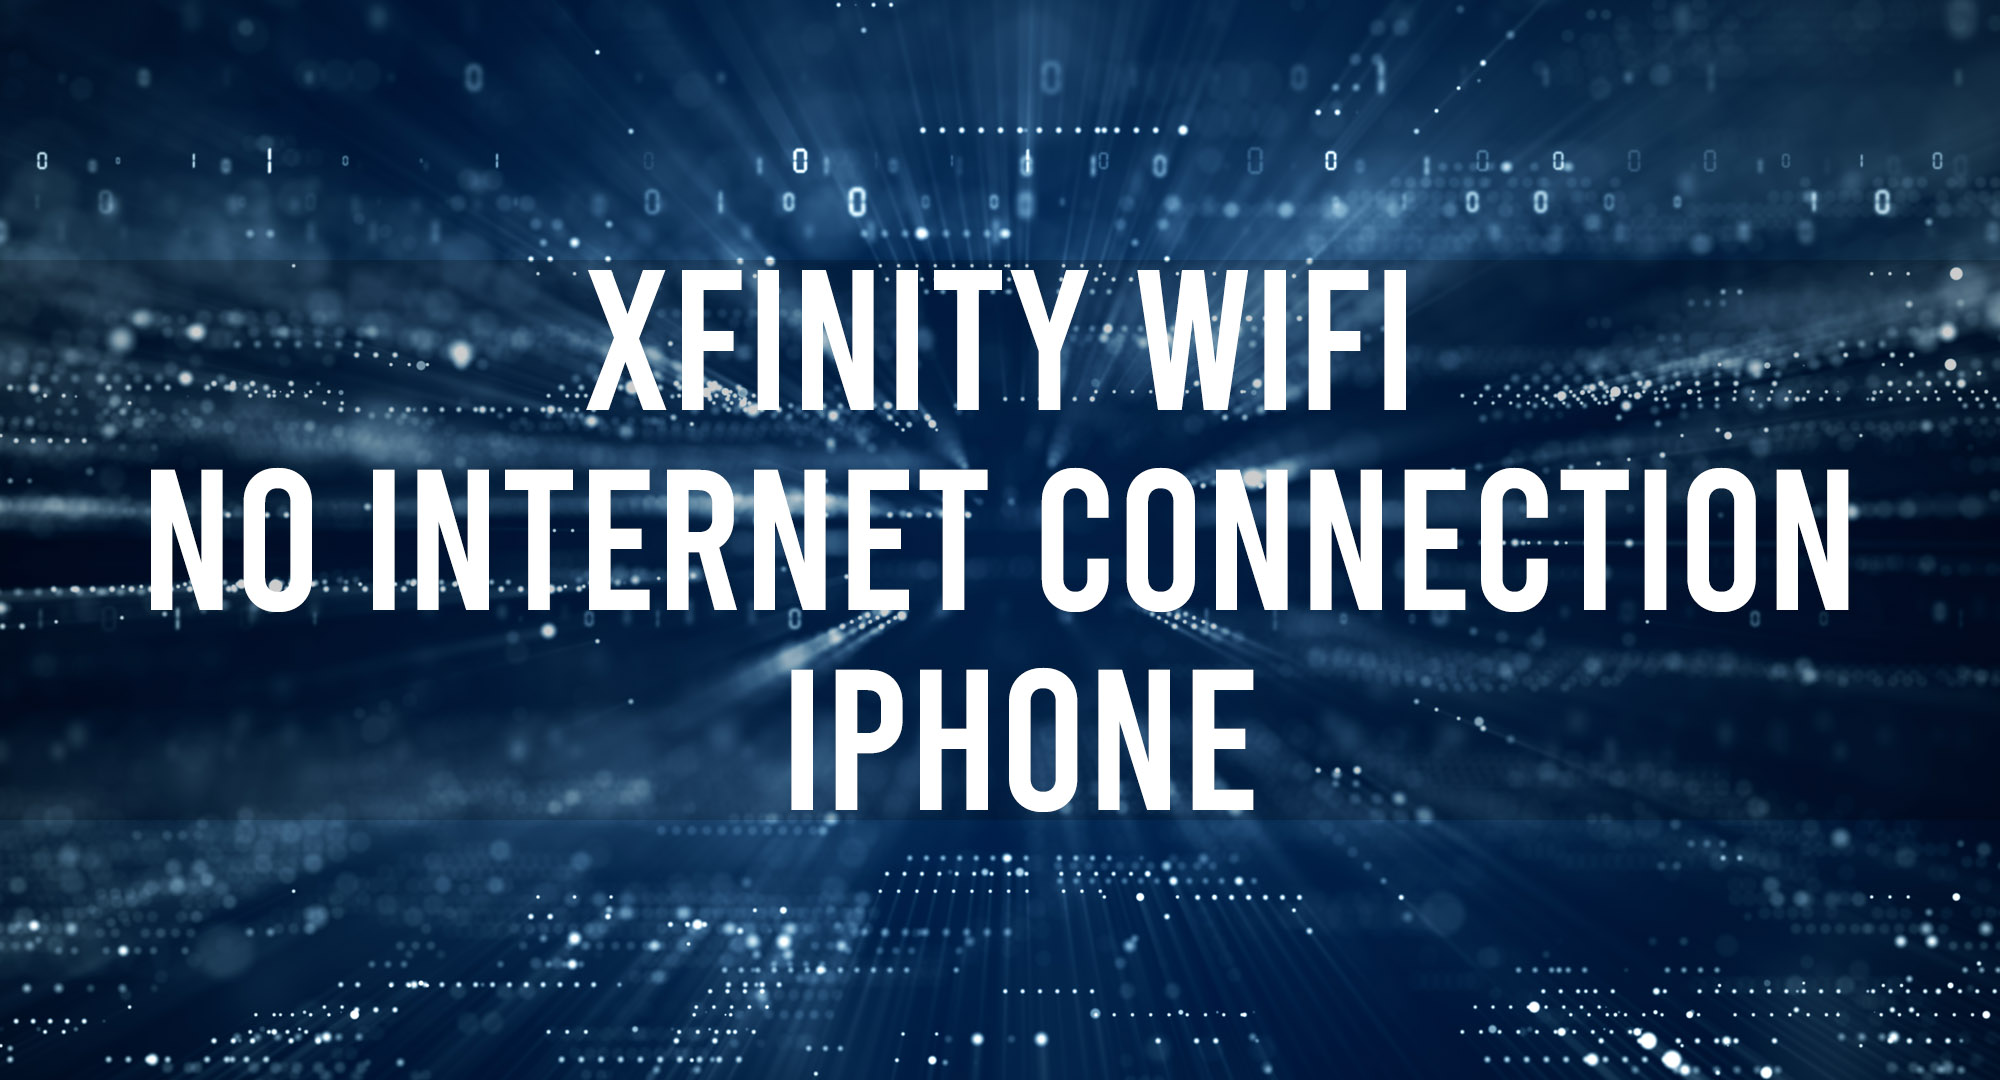 Xfinity WiFi No Internet Connection iPhone